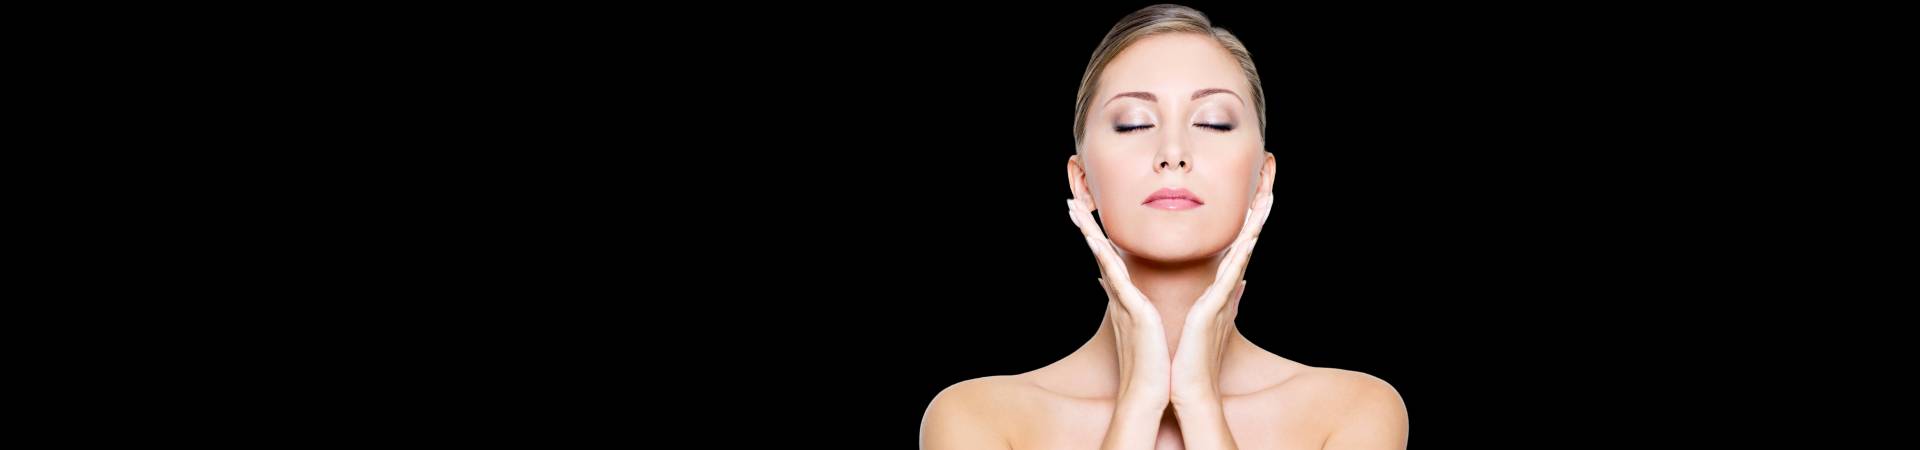 Non-Surgical Jaw Reduction Los Angeles, CA